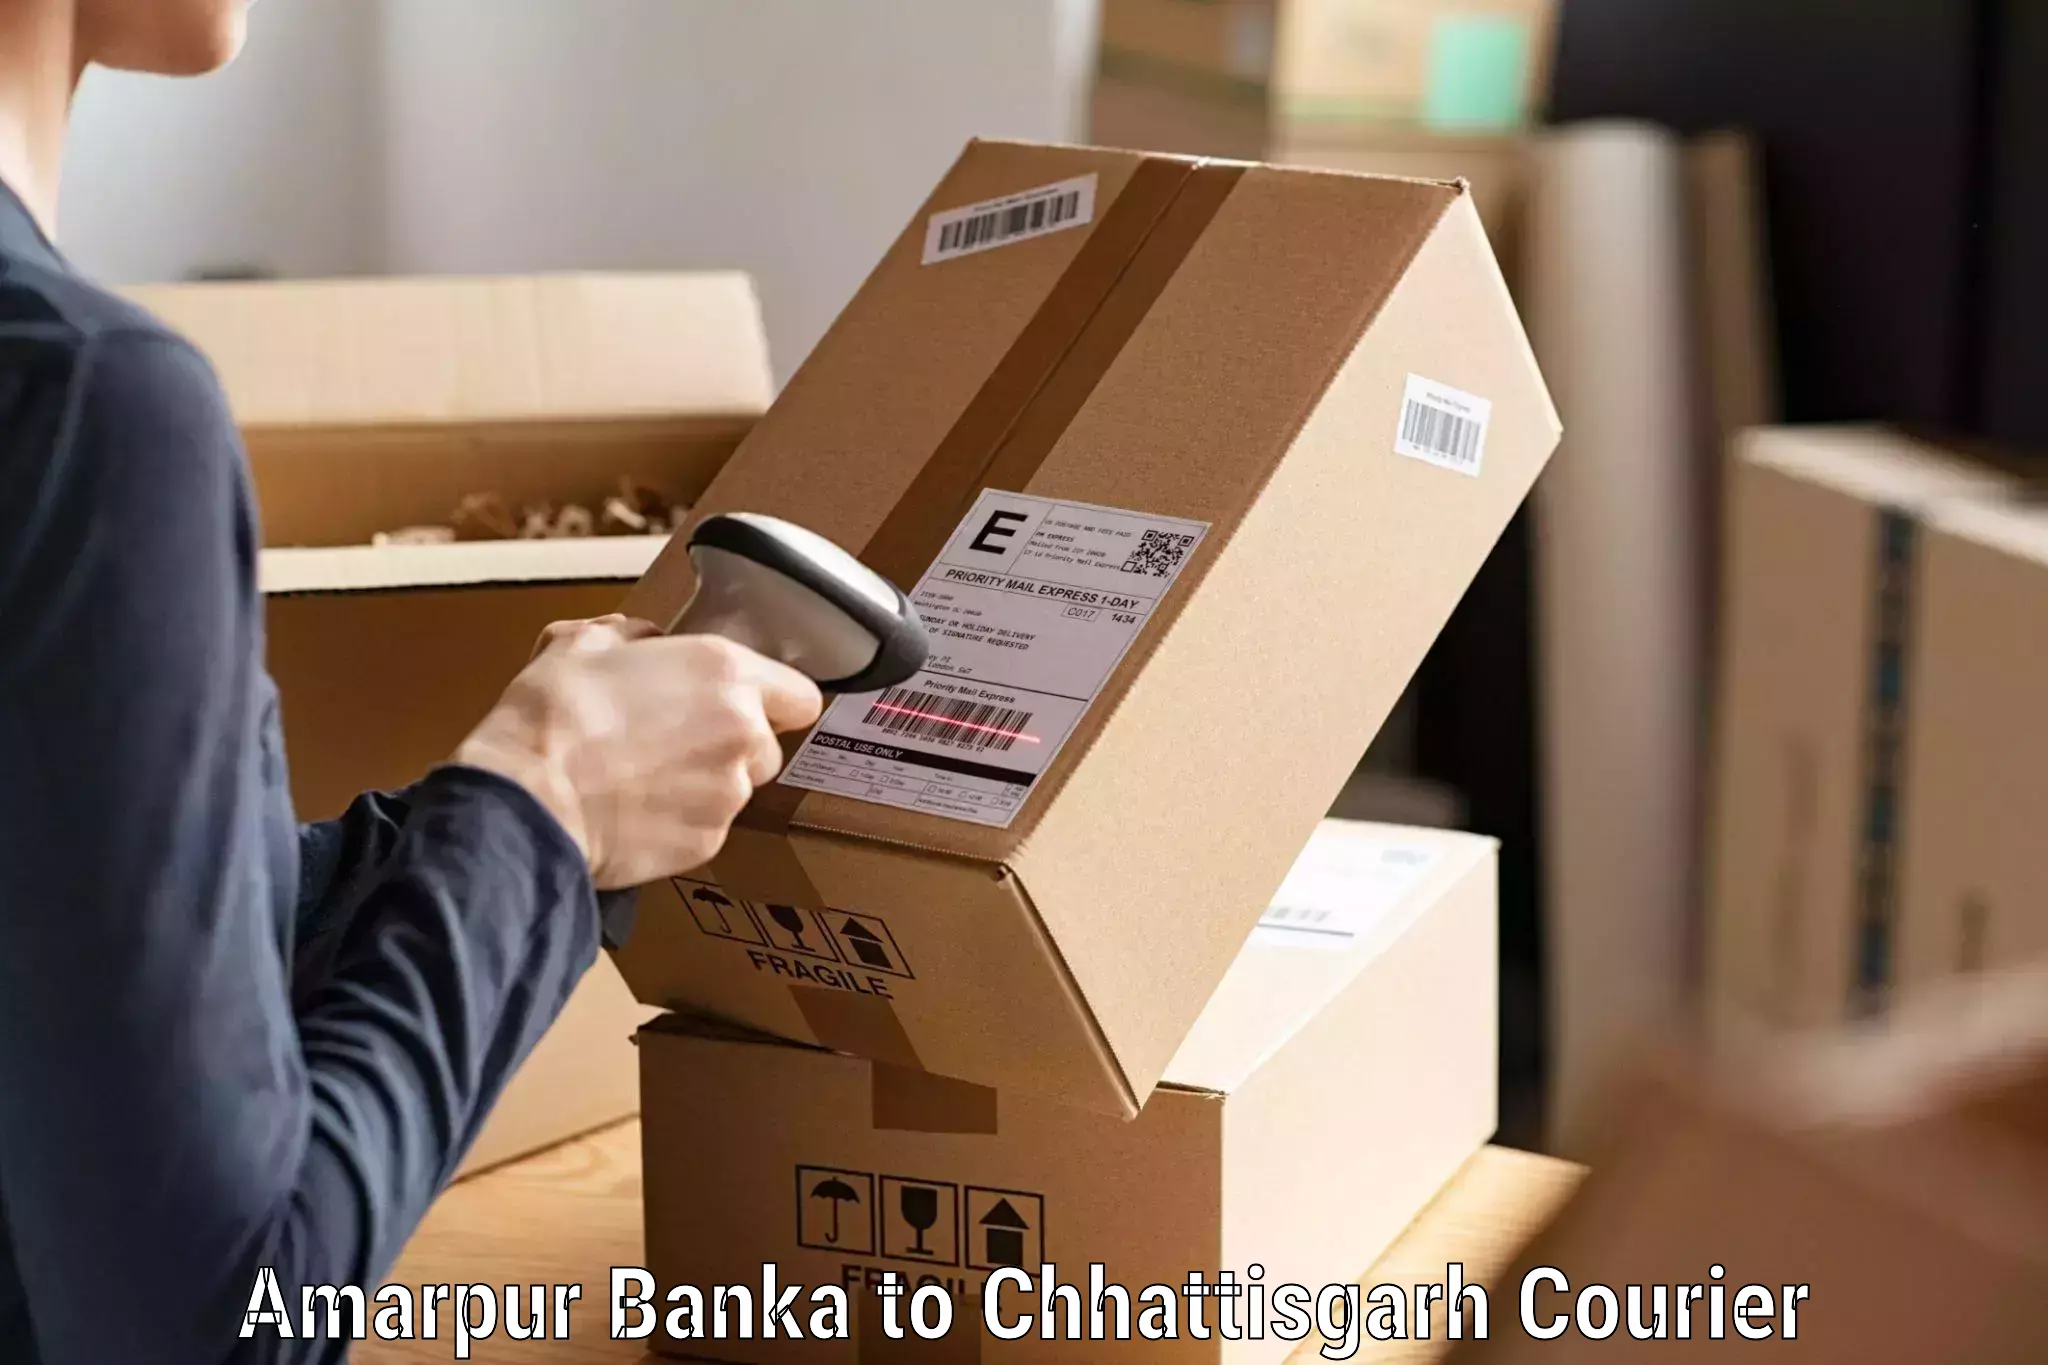 Courier service booking Amarpur Banka to Basna